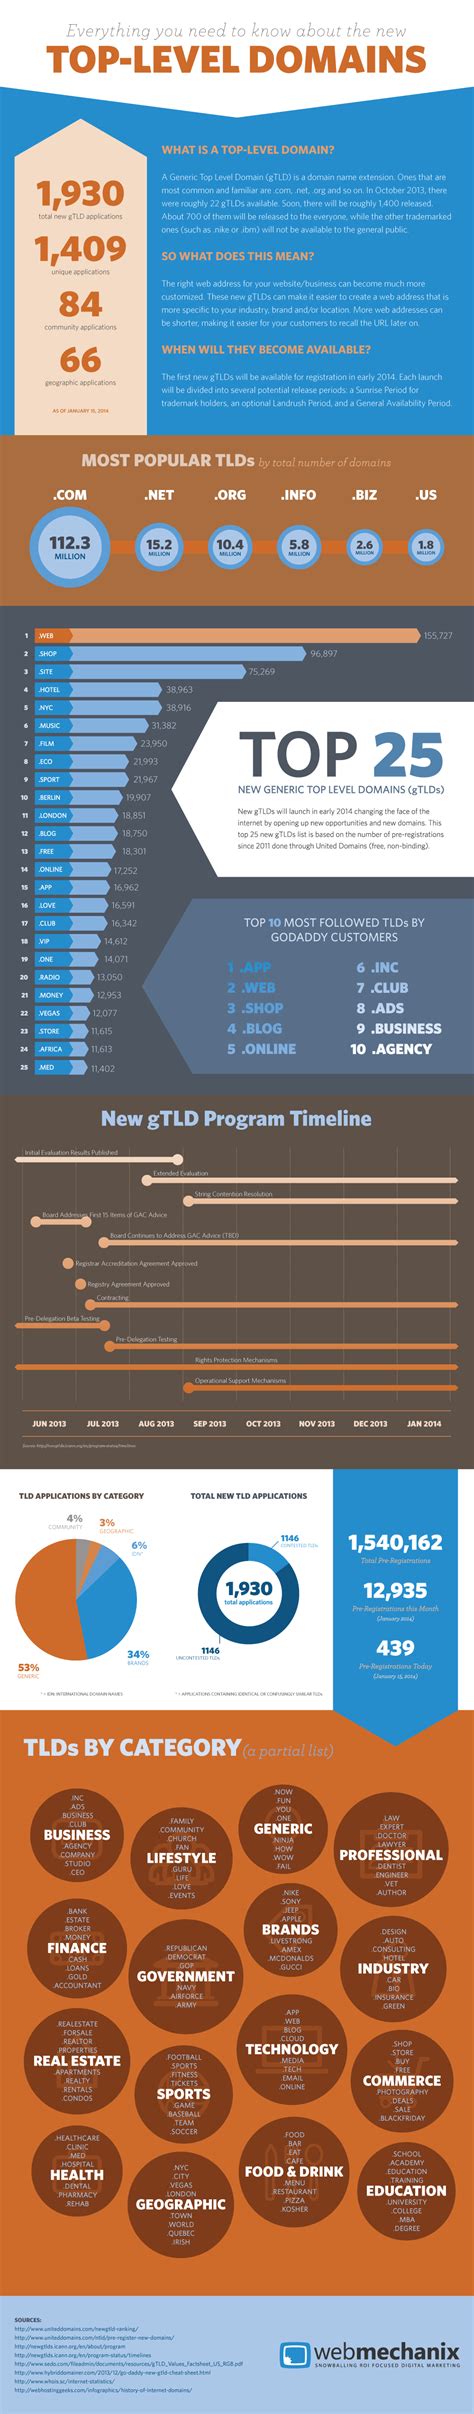 Everything You Need To Know About New Top Level Domains Infographic Top Level Domain